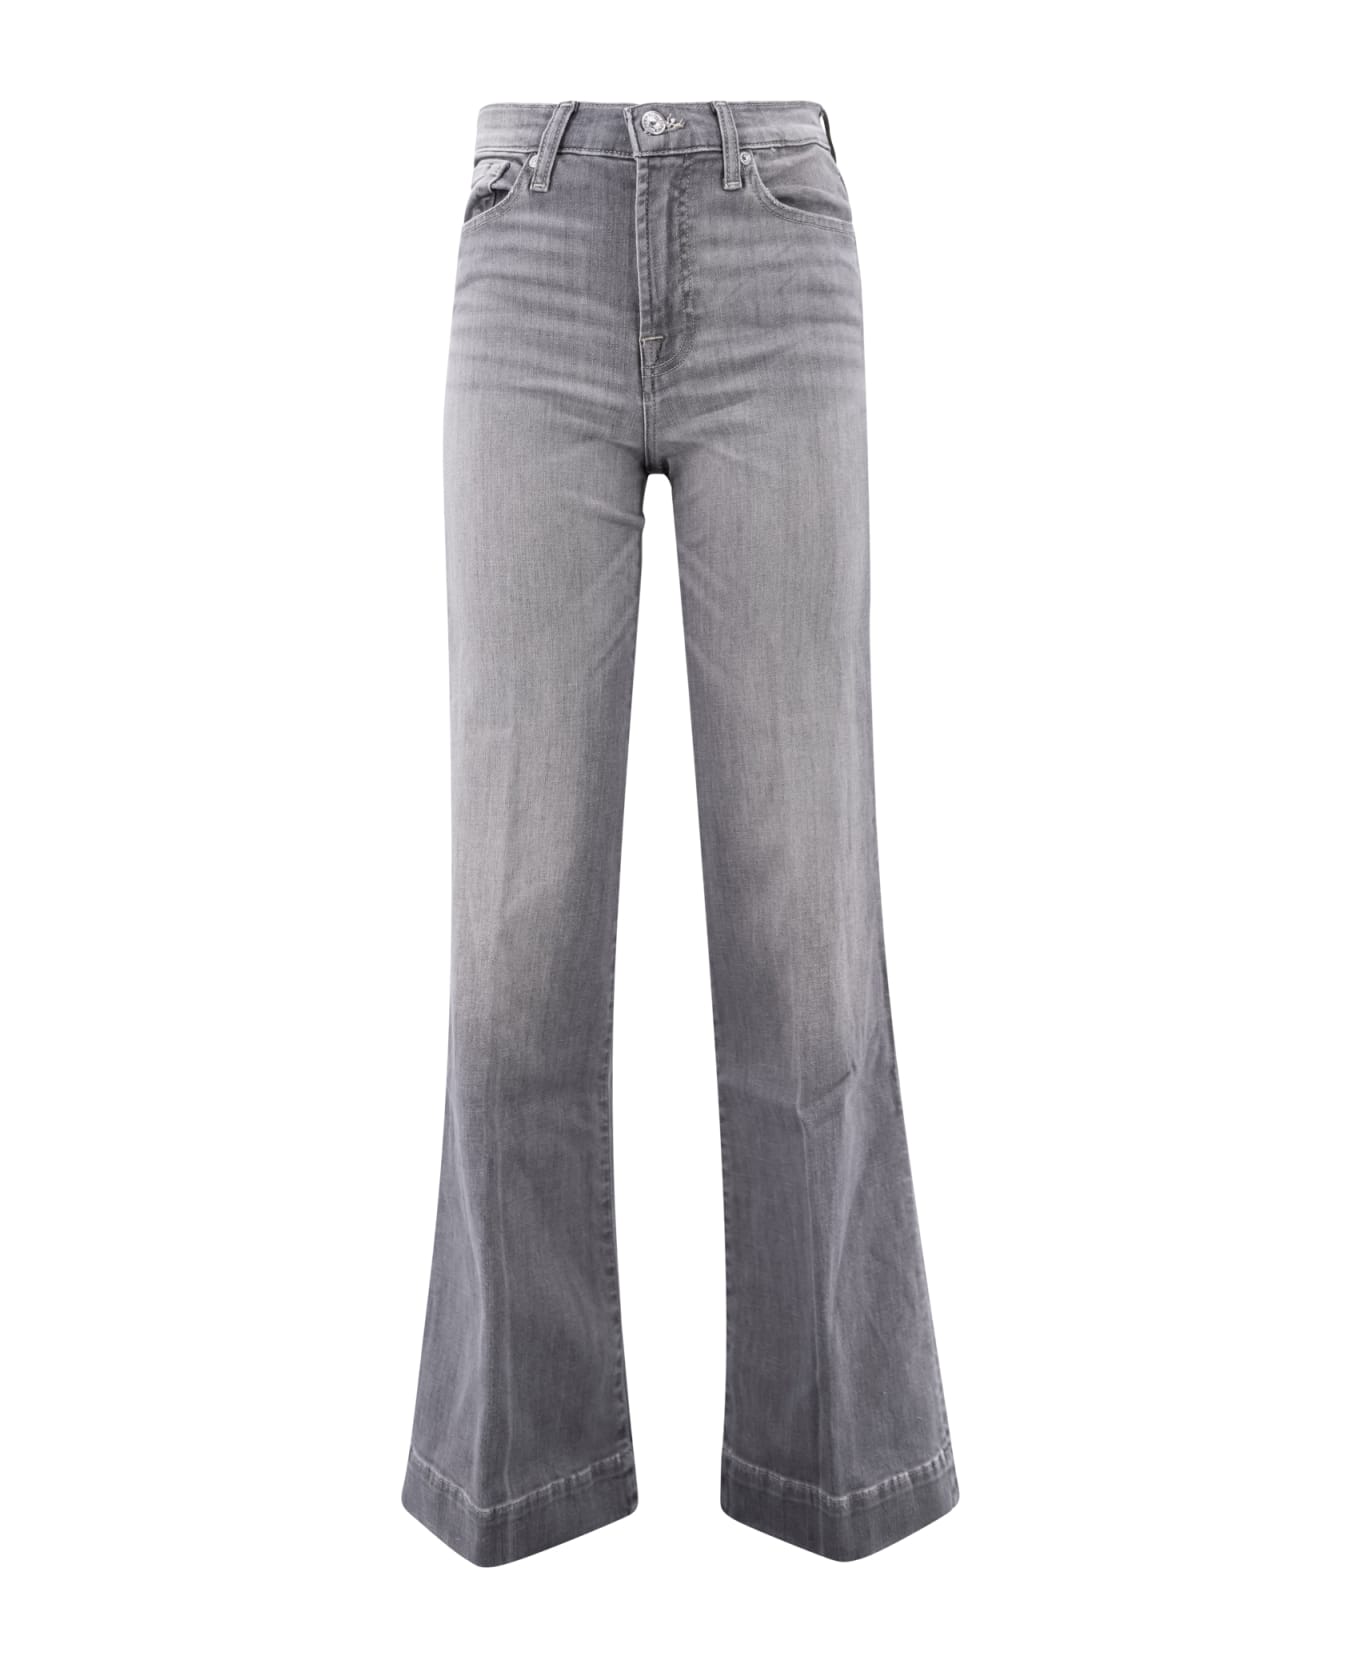 7 For All Mankind Modern Dojo High-rise Flared Jeans - Grey